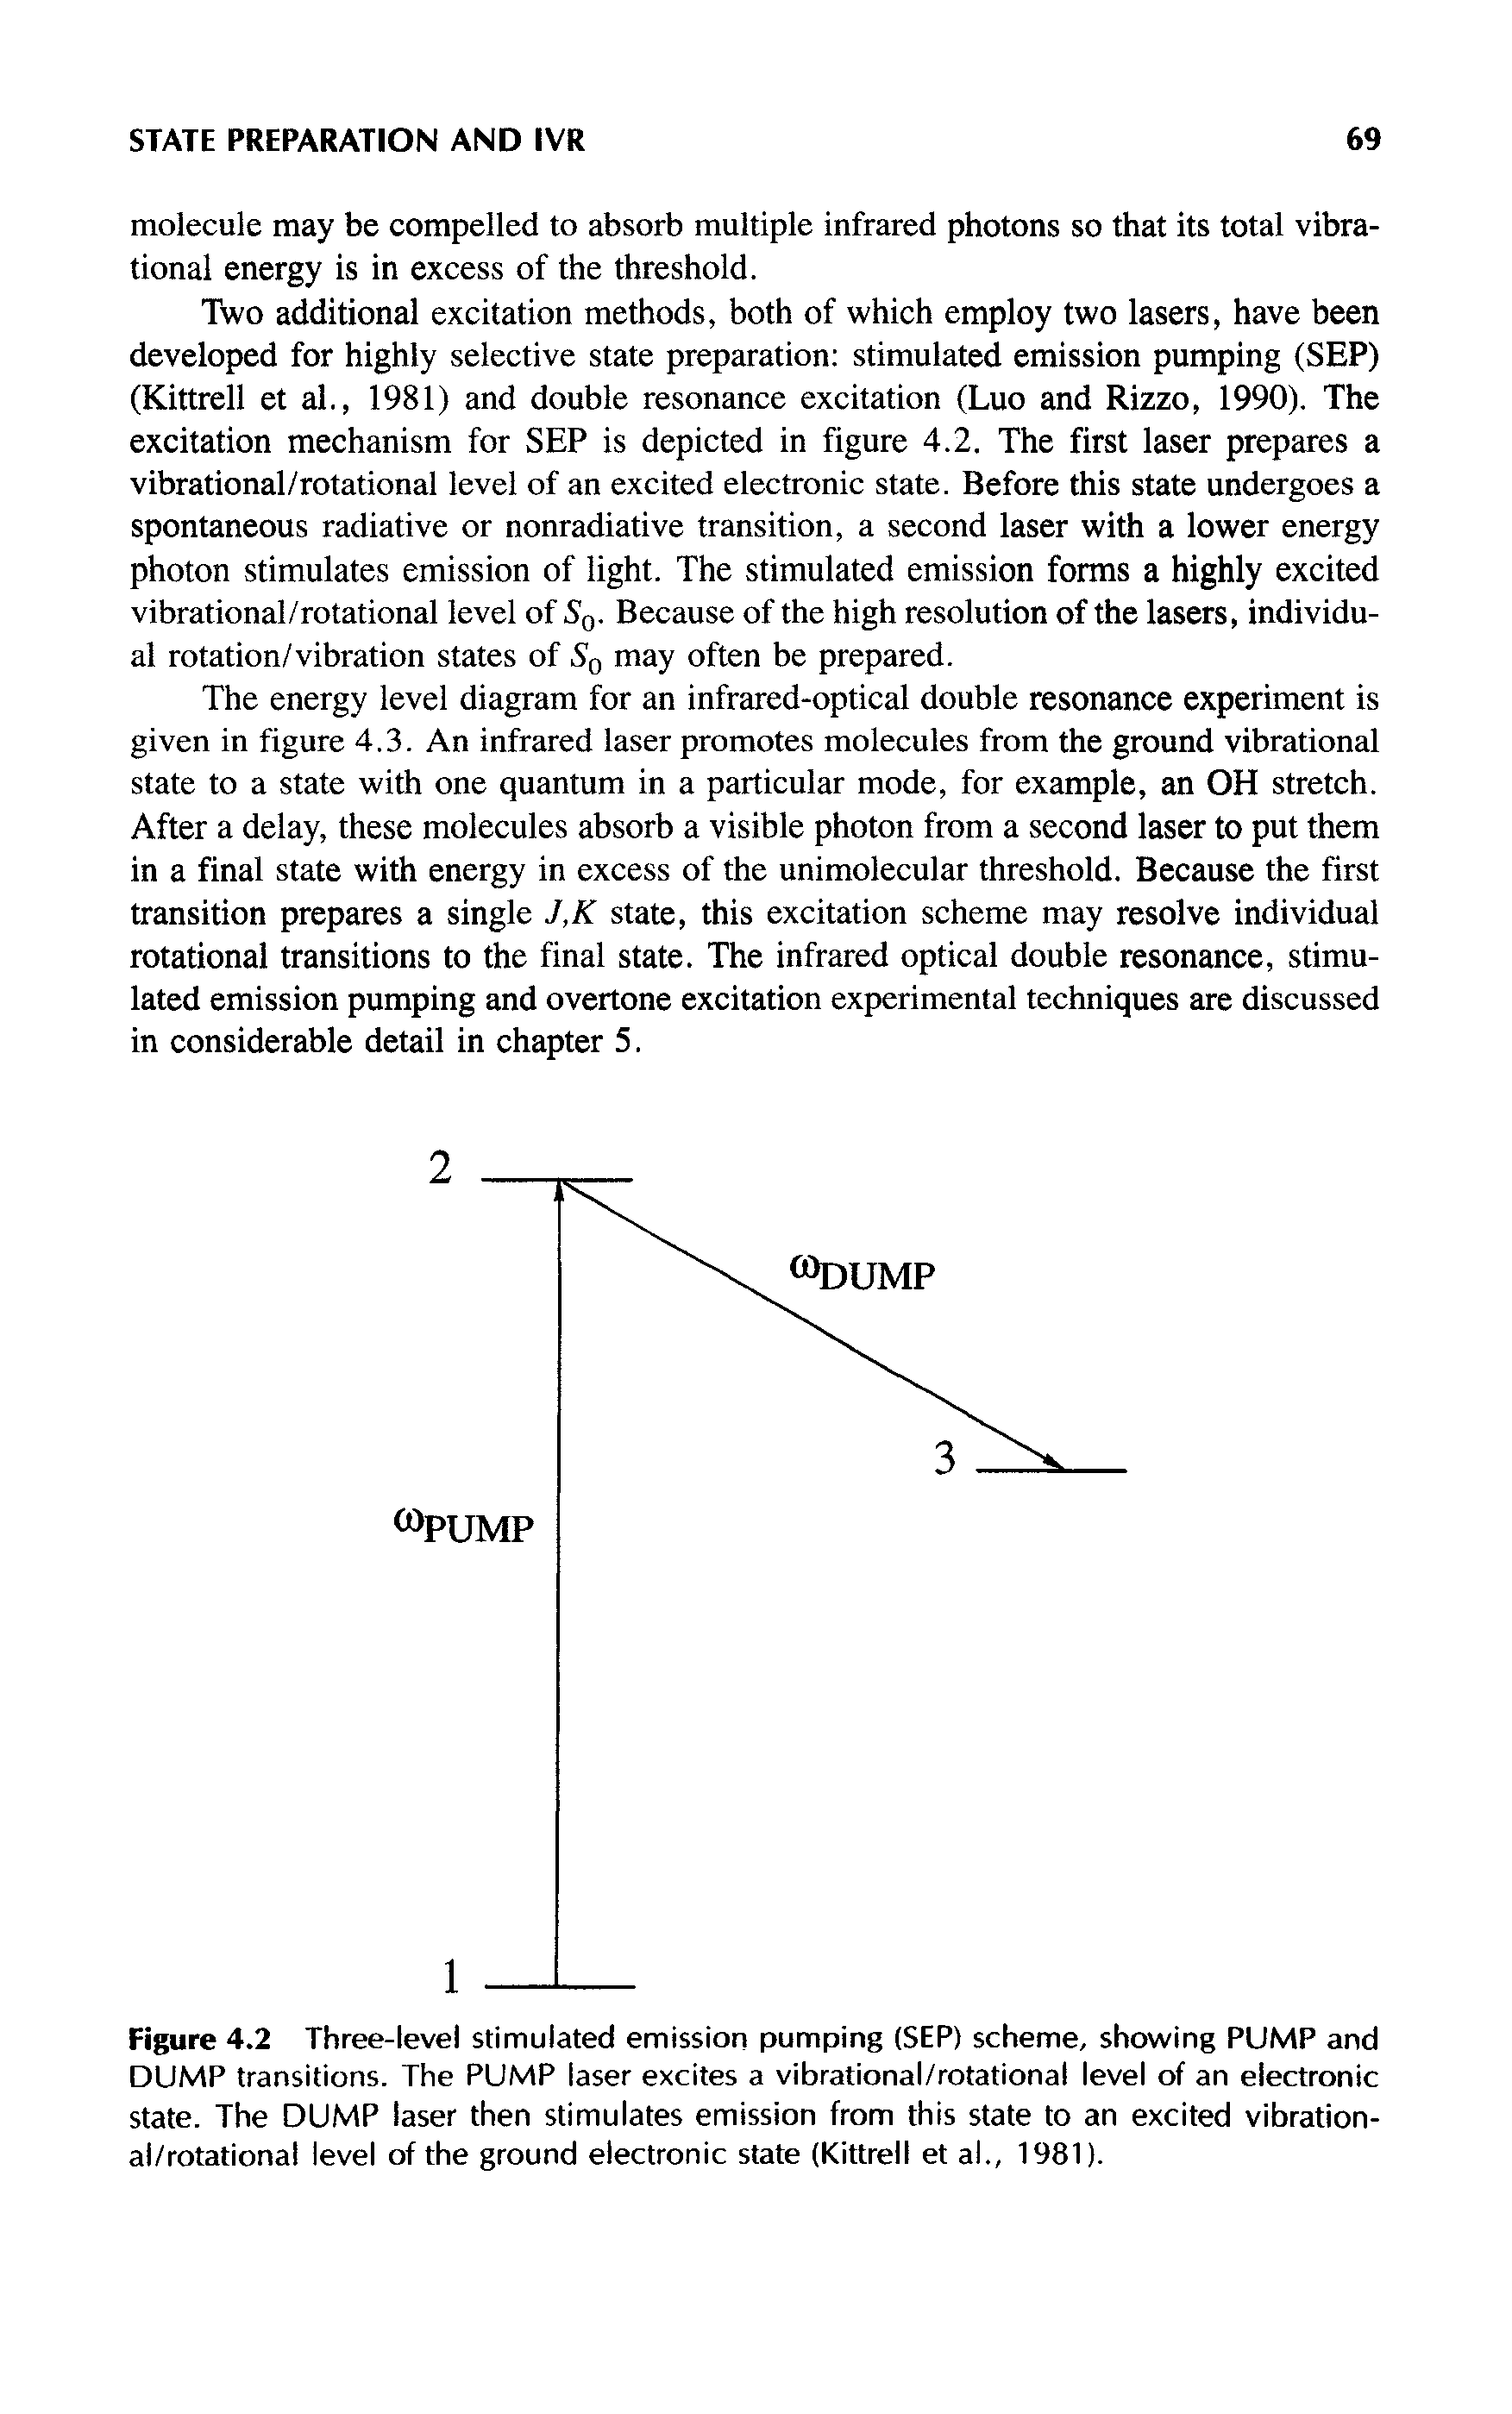 Figure 4.2 Three-level stimulated emission pumping (SEP) scheme, showing PUMP and DUMP transitions. The PUMP laser excites a vibrational/rotational level of an electronic state. The DUMP laser then stimulates emission from this state to an excited vibrational/rotational level of the ground electronic state (Kittrell et al., 1981).